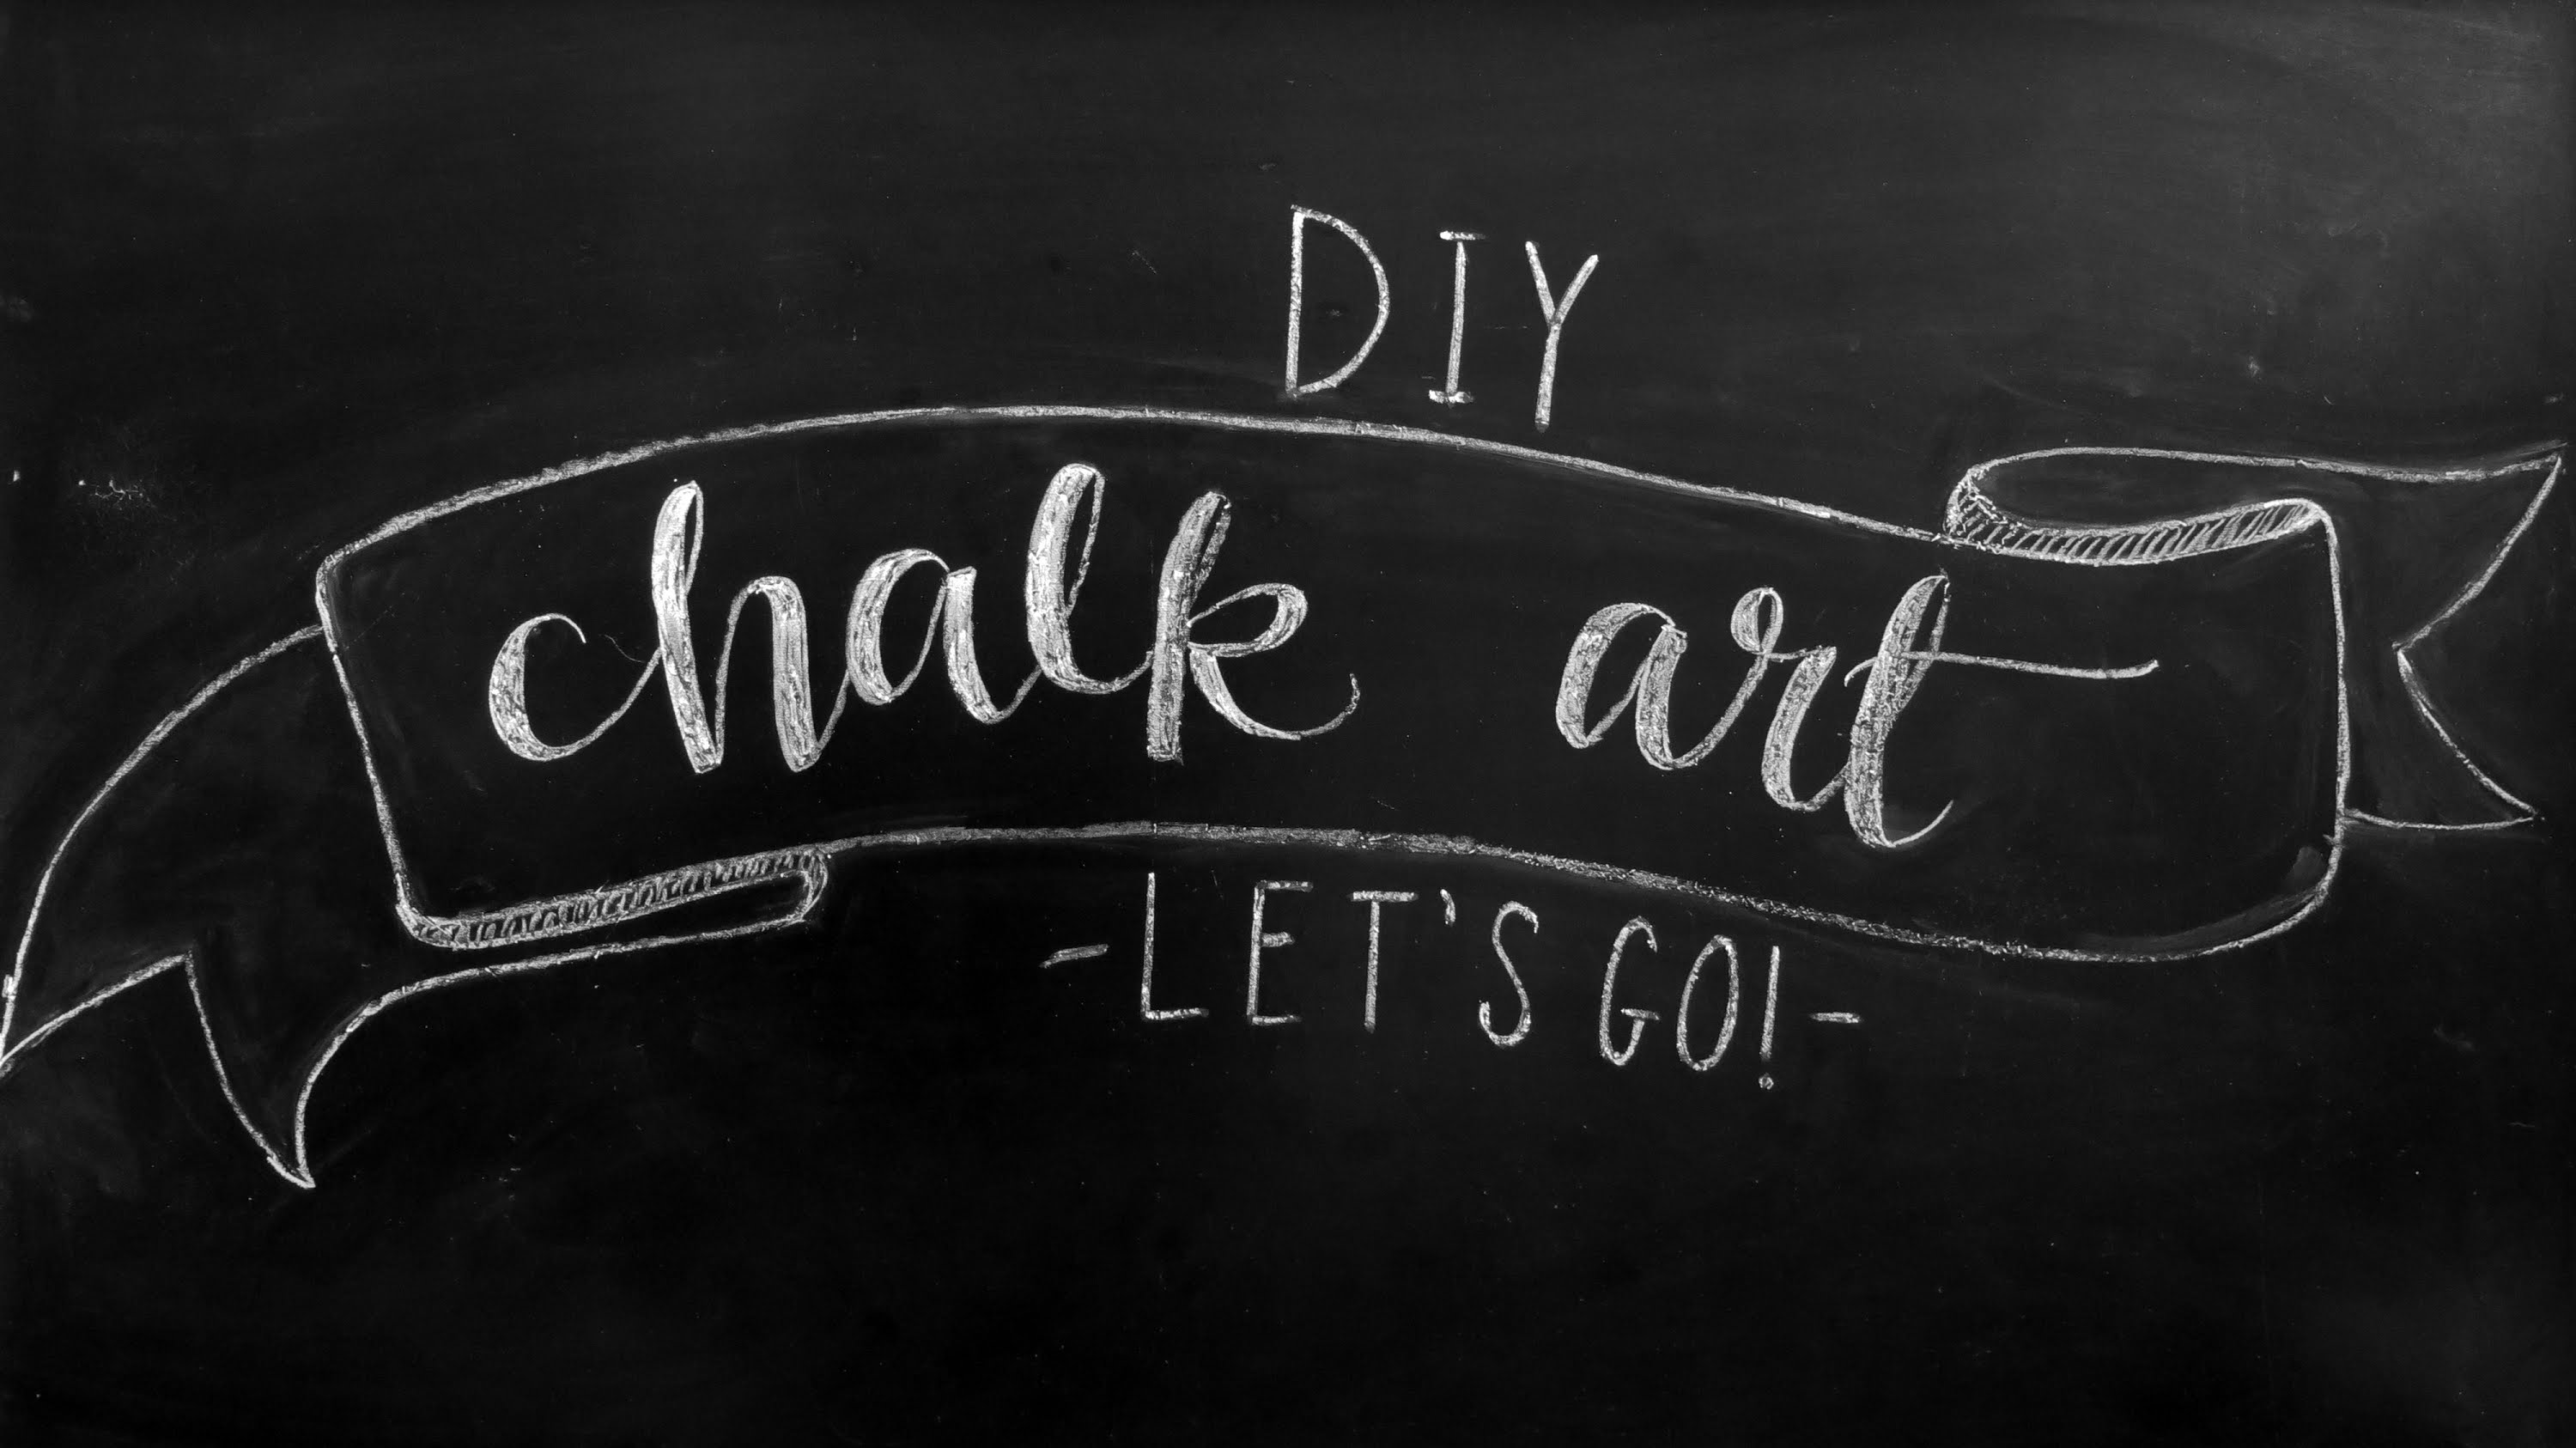 How to Faux Calligraphy + DIY Chalkboard Design Tips - YouTube